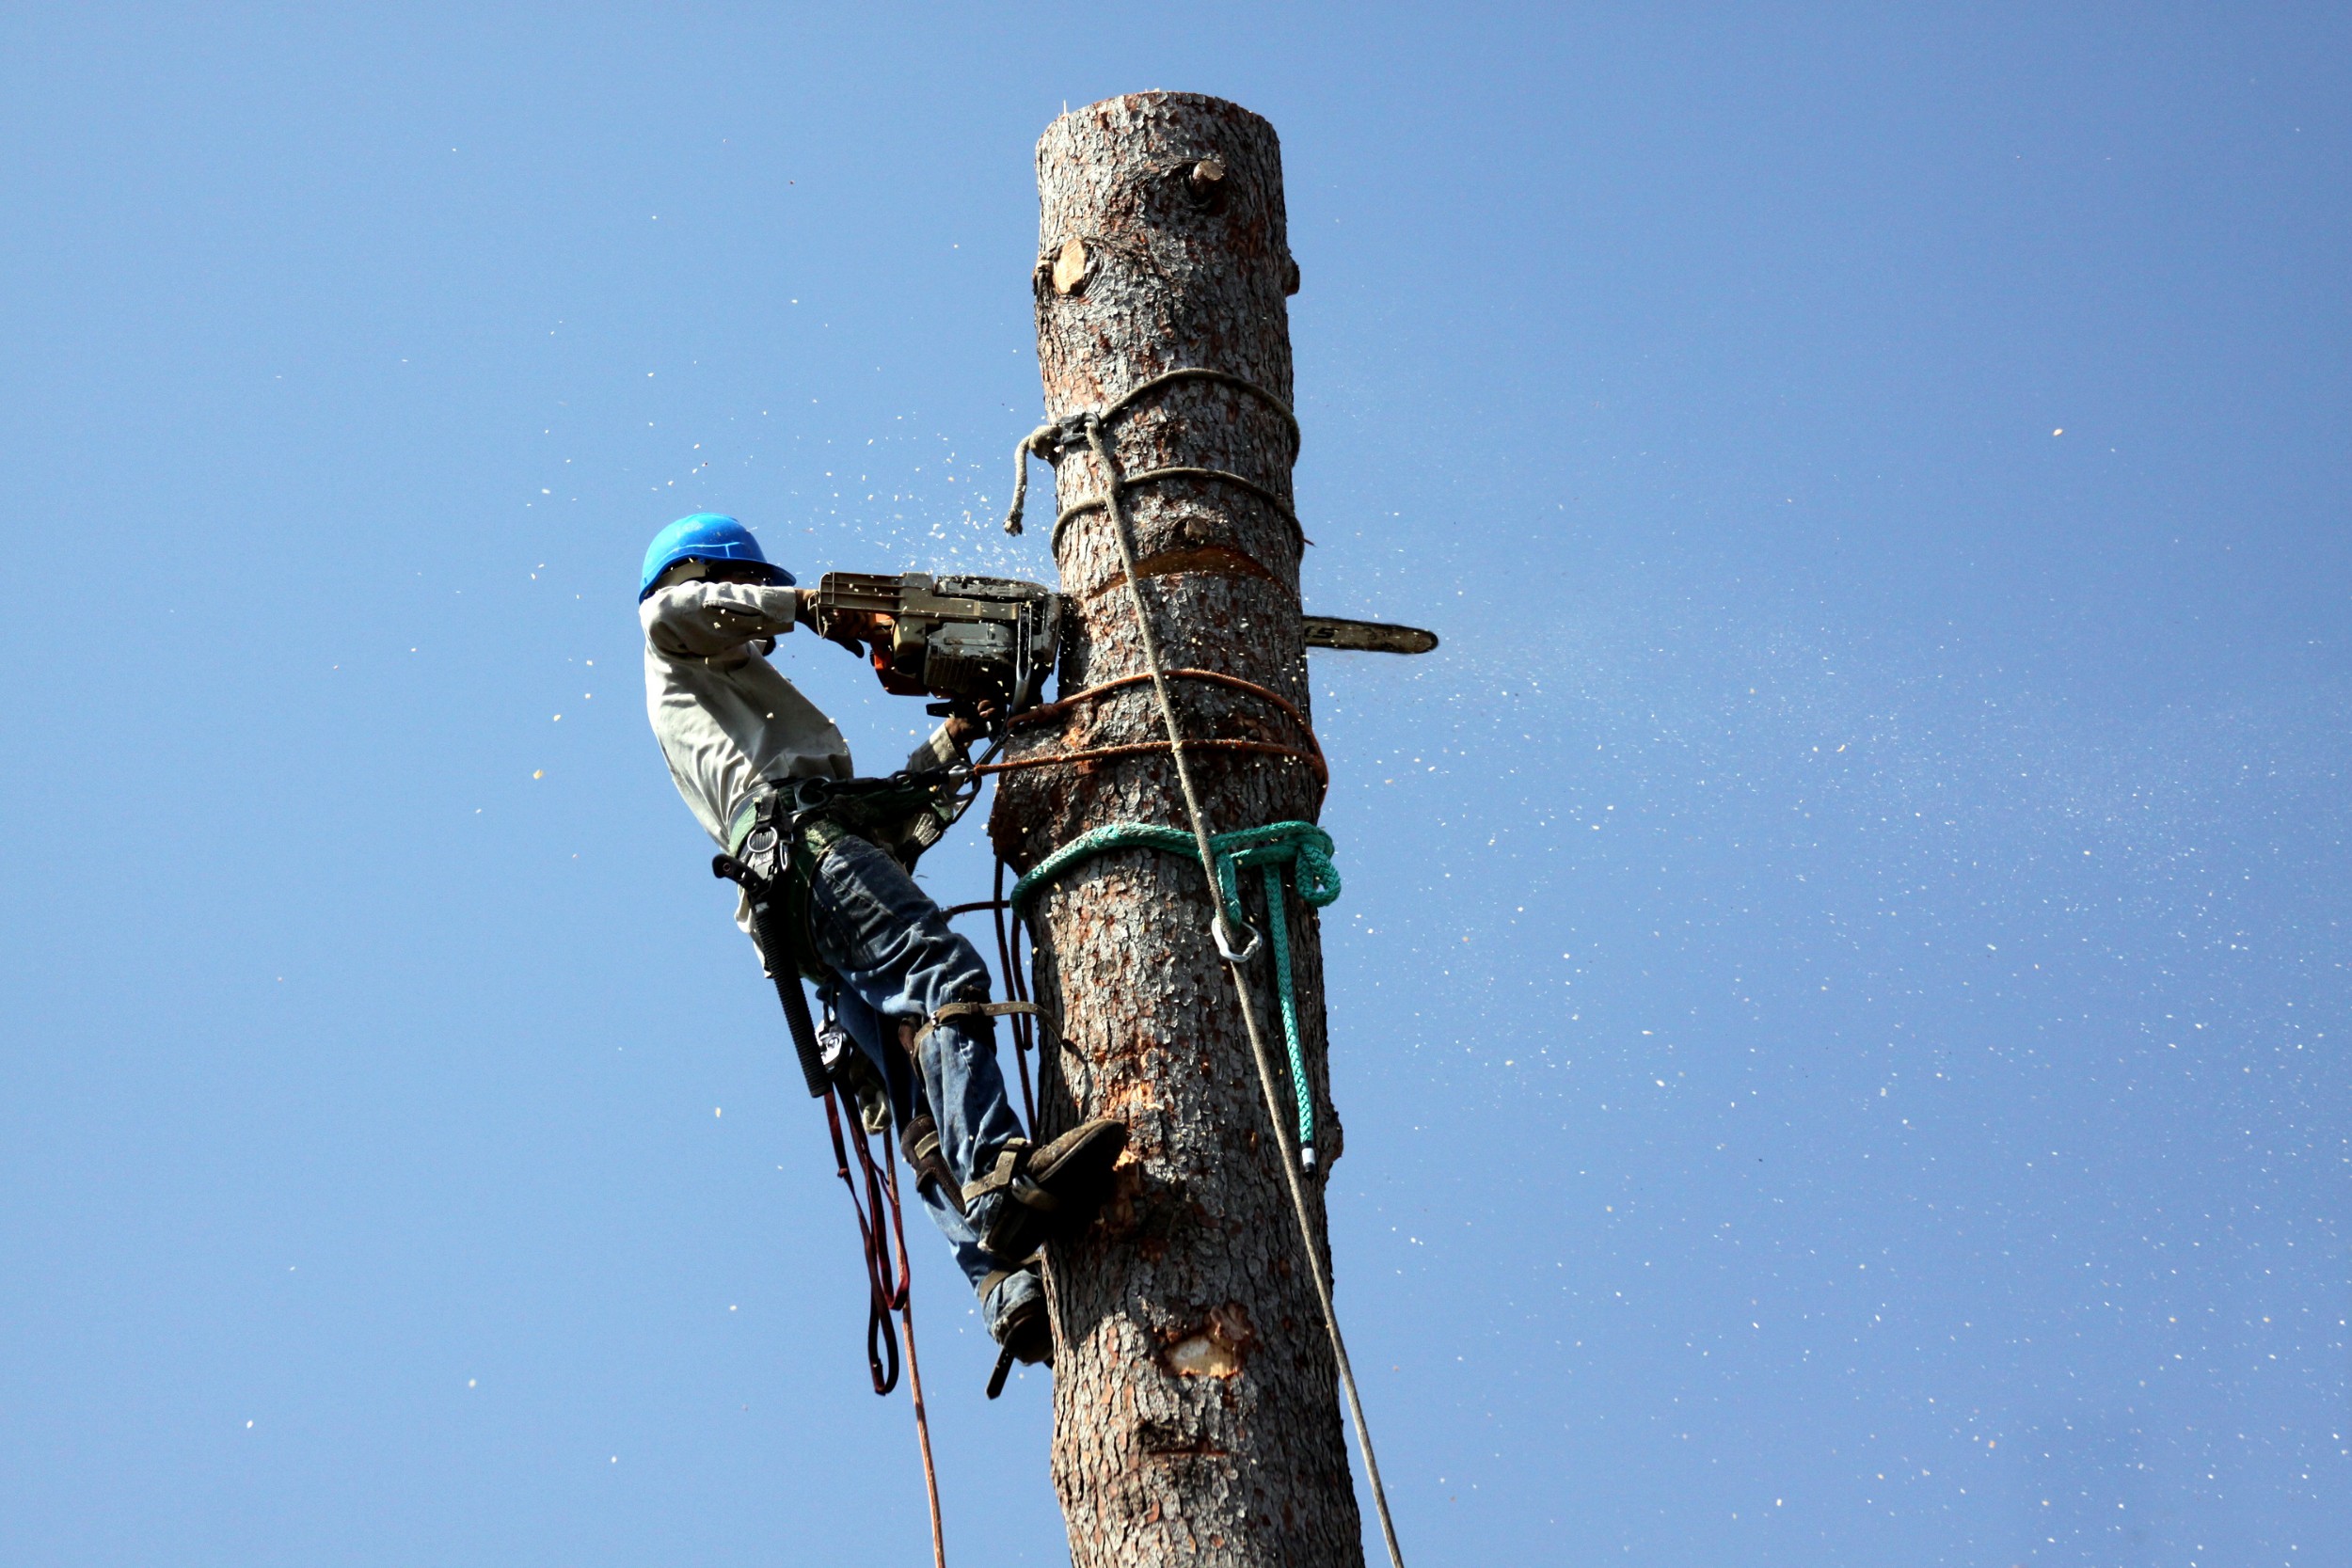 An Orlando Tree Service Company Can Help with Tree Removal and Land Clearing